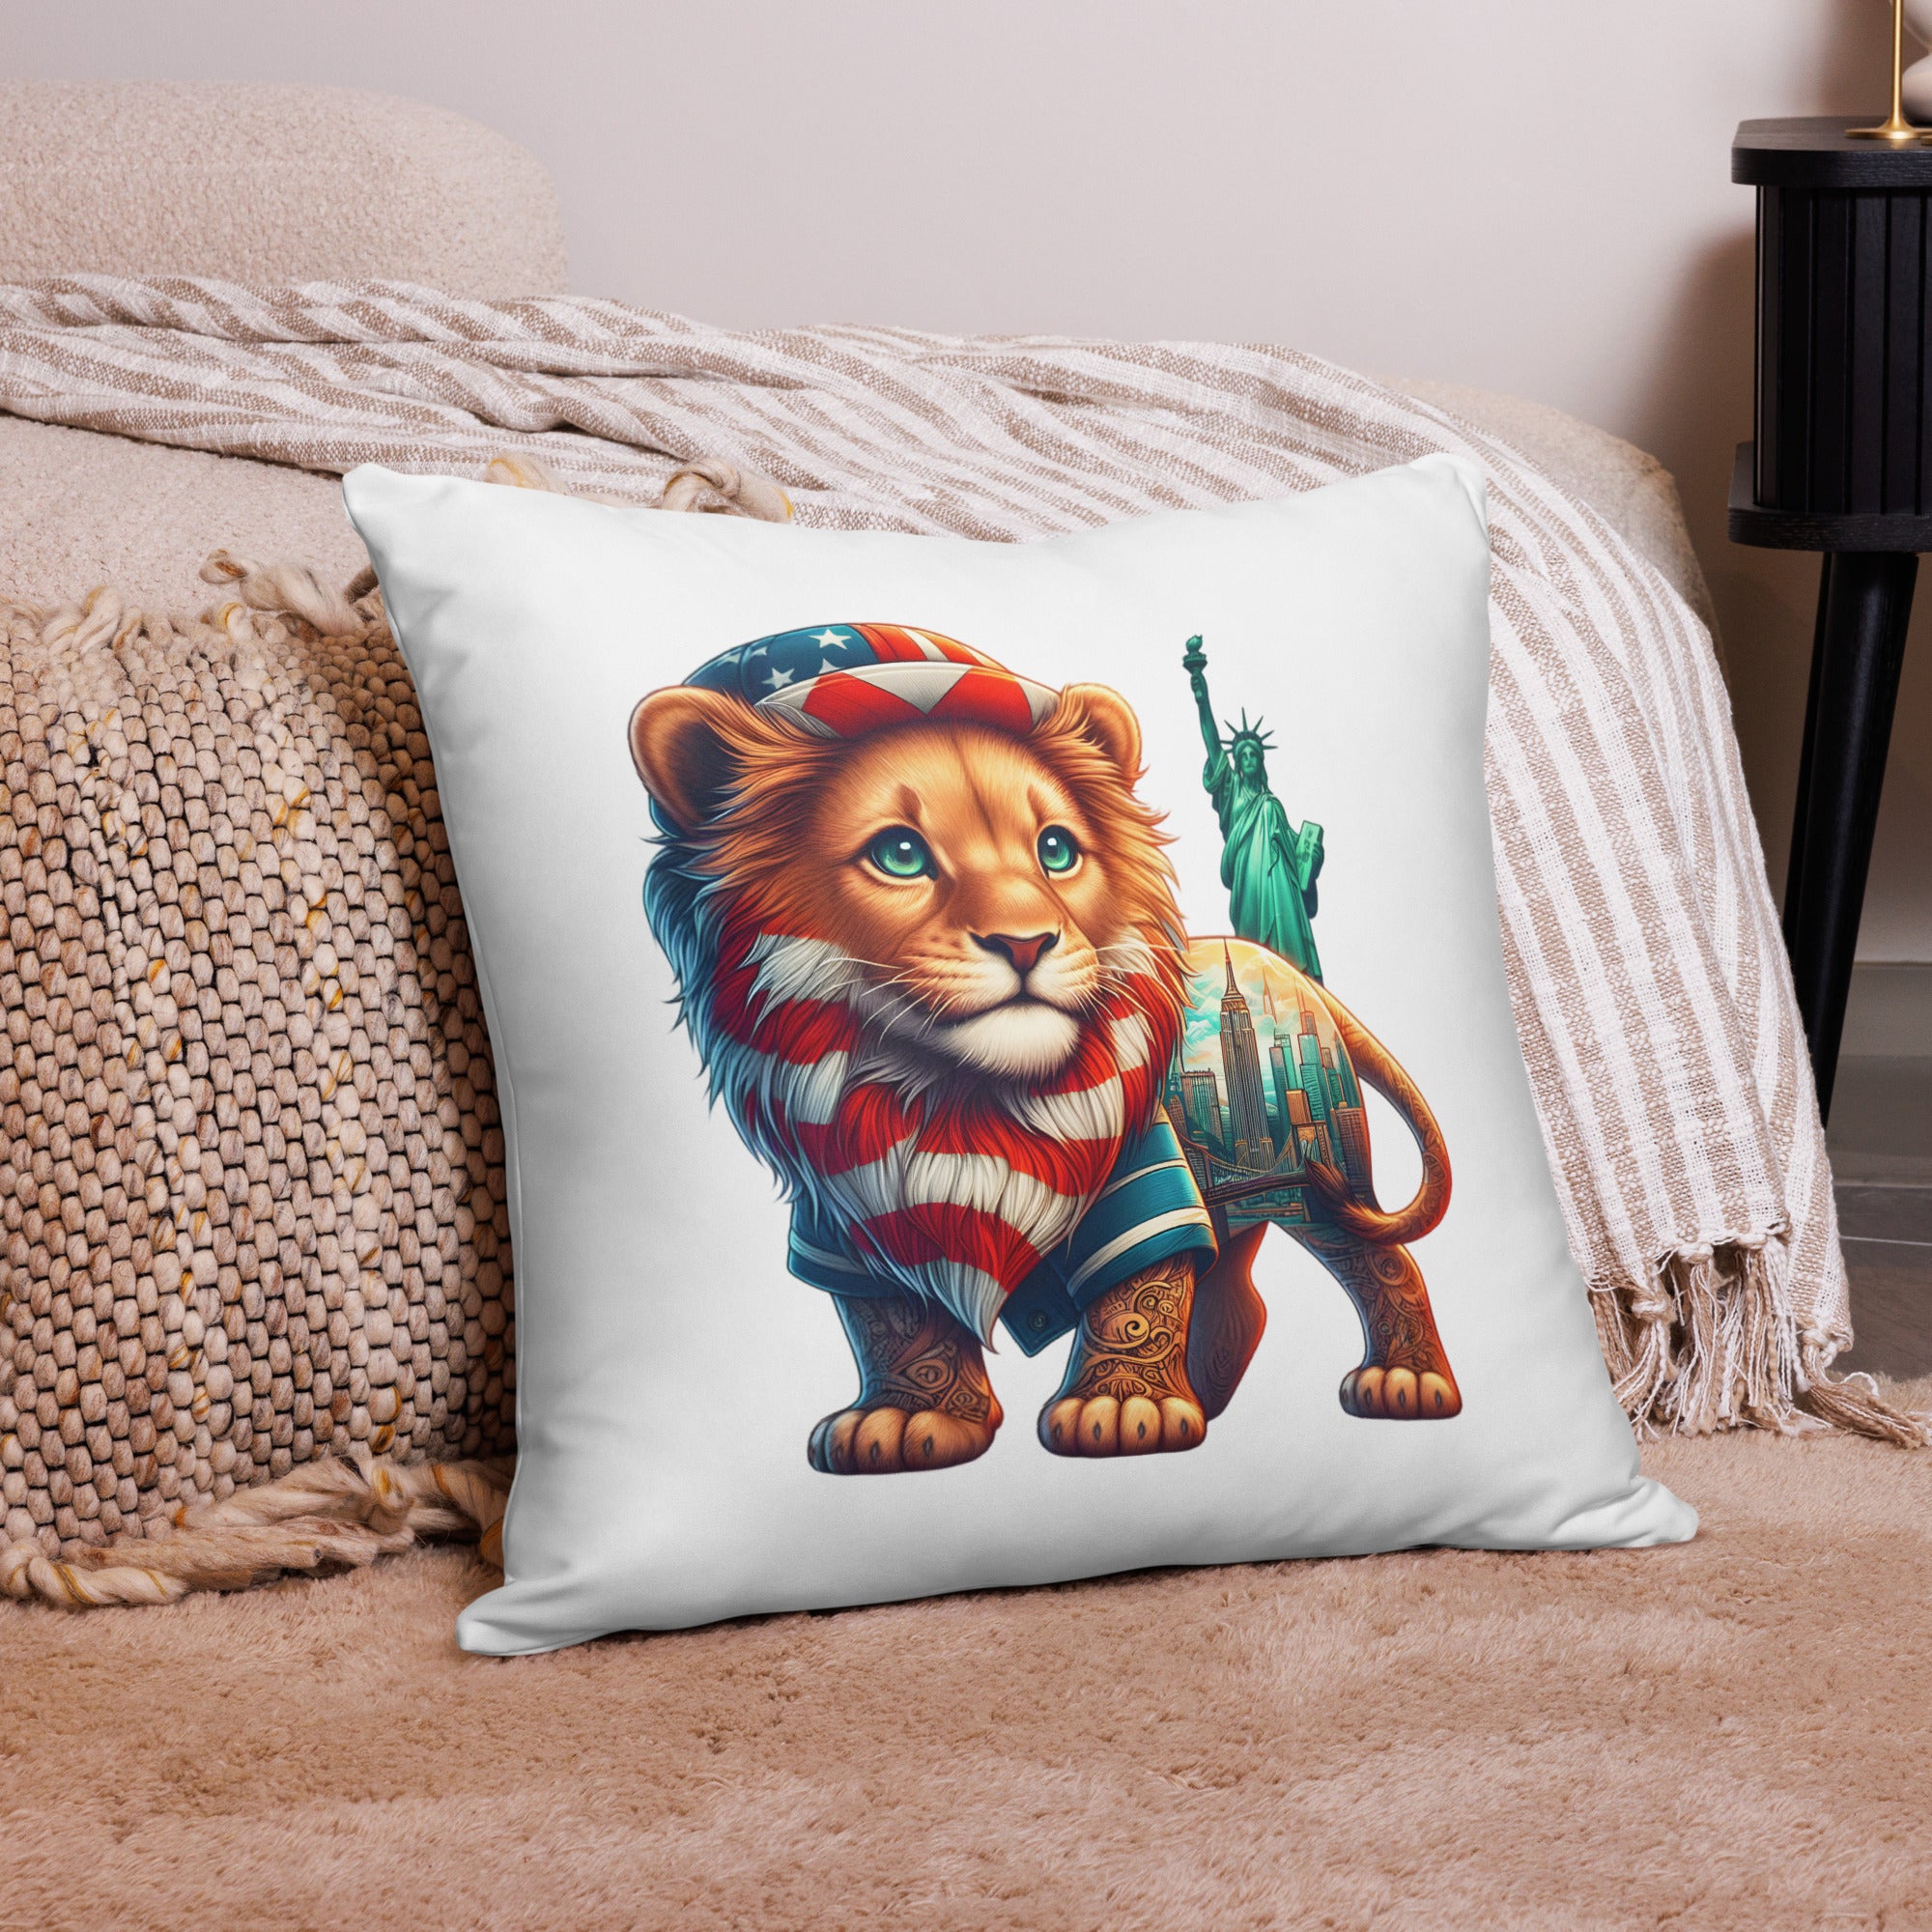 New York Lion Cushion: Animal Pillow Design for Home Decor and Lifestyle